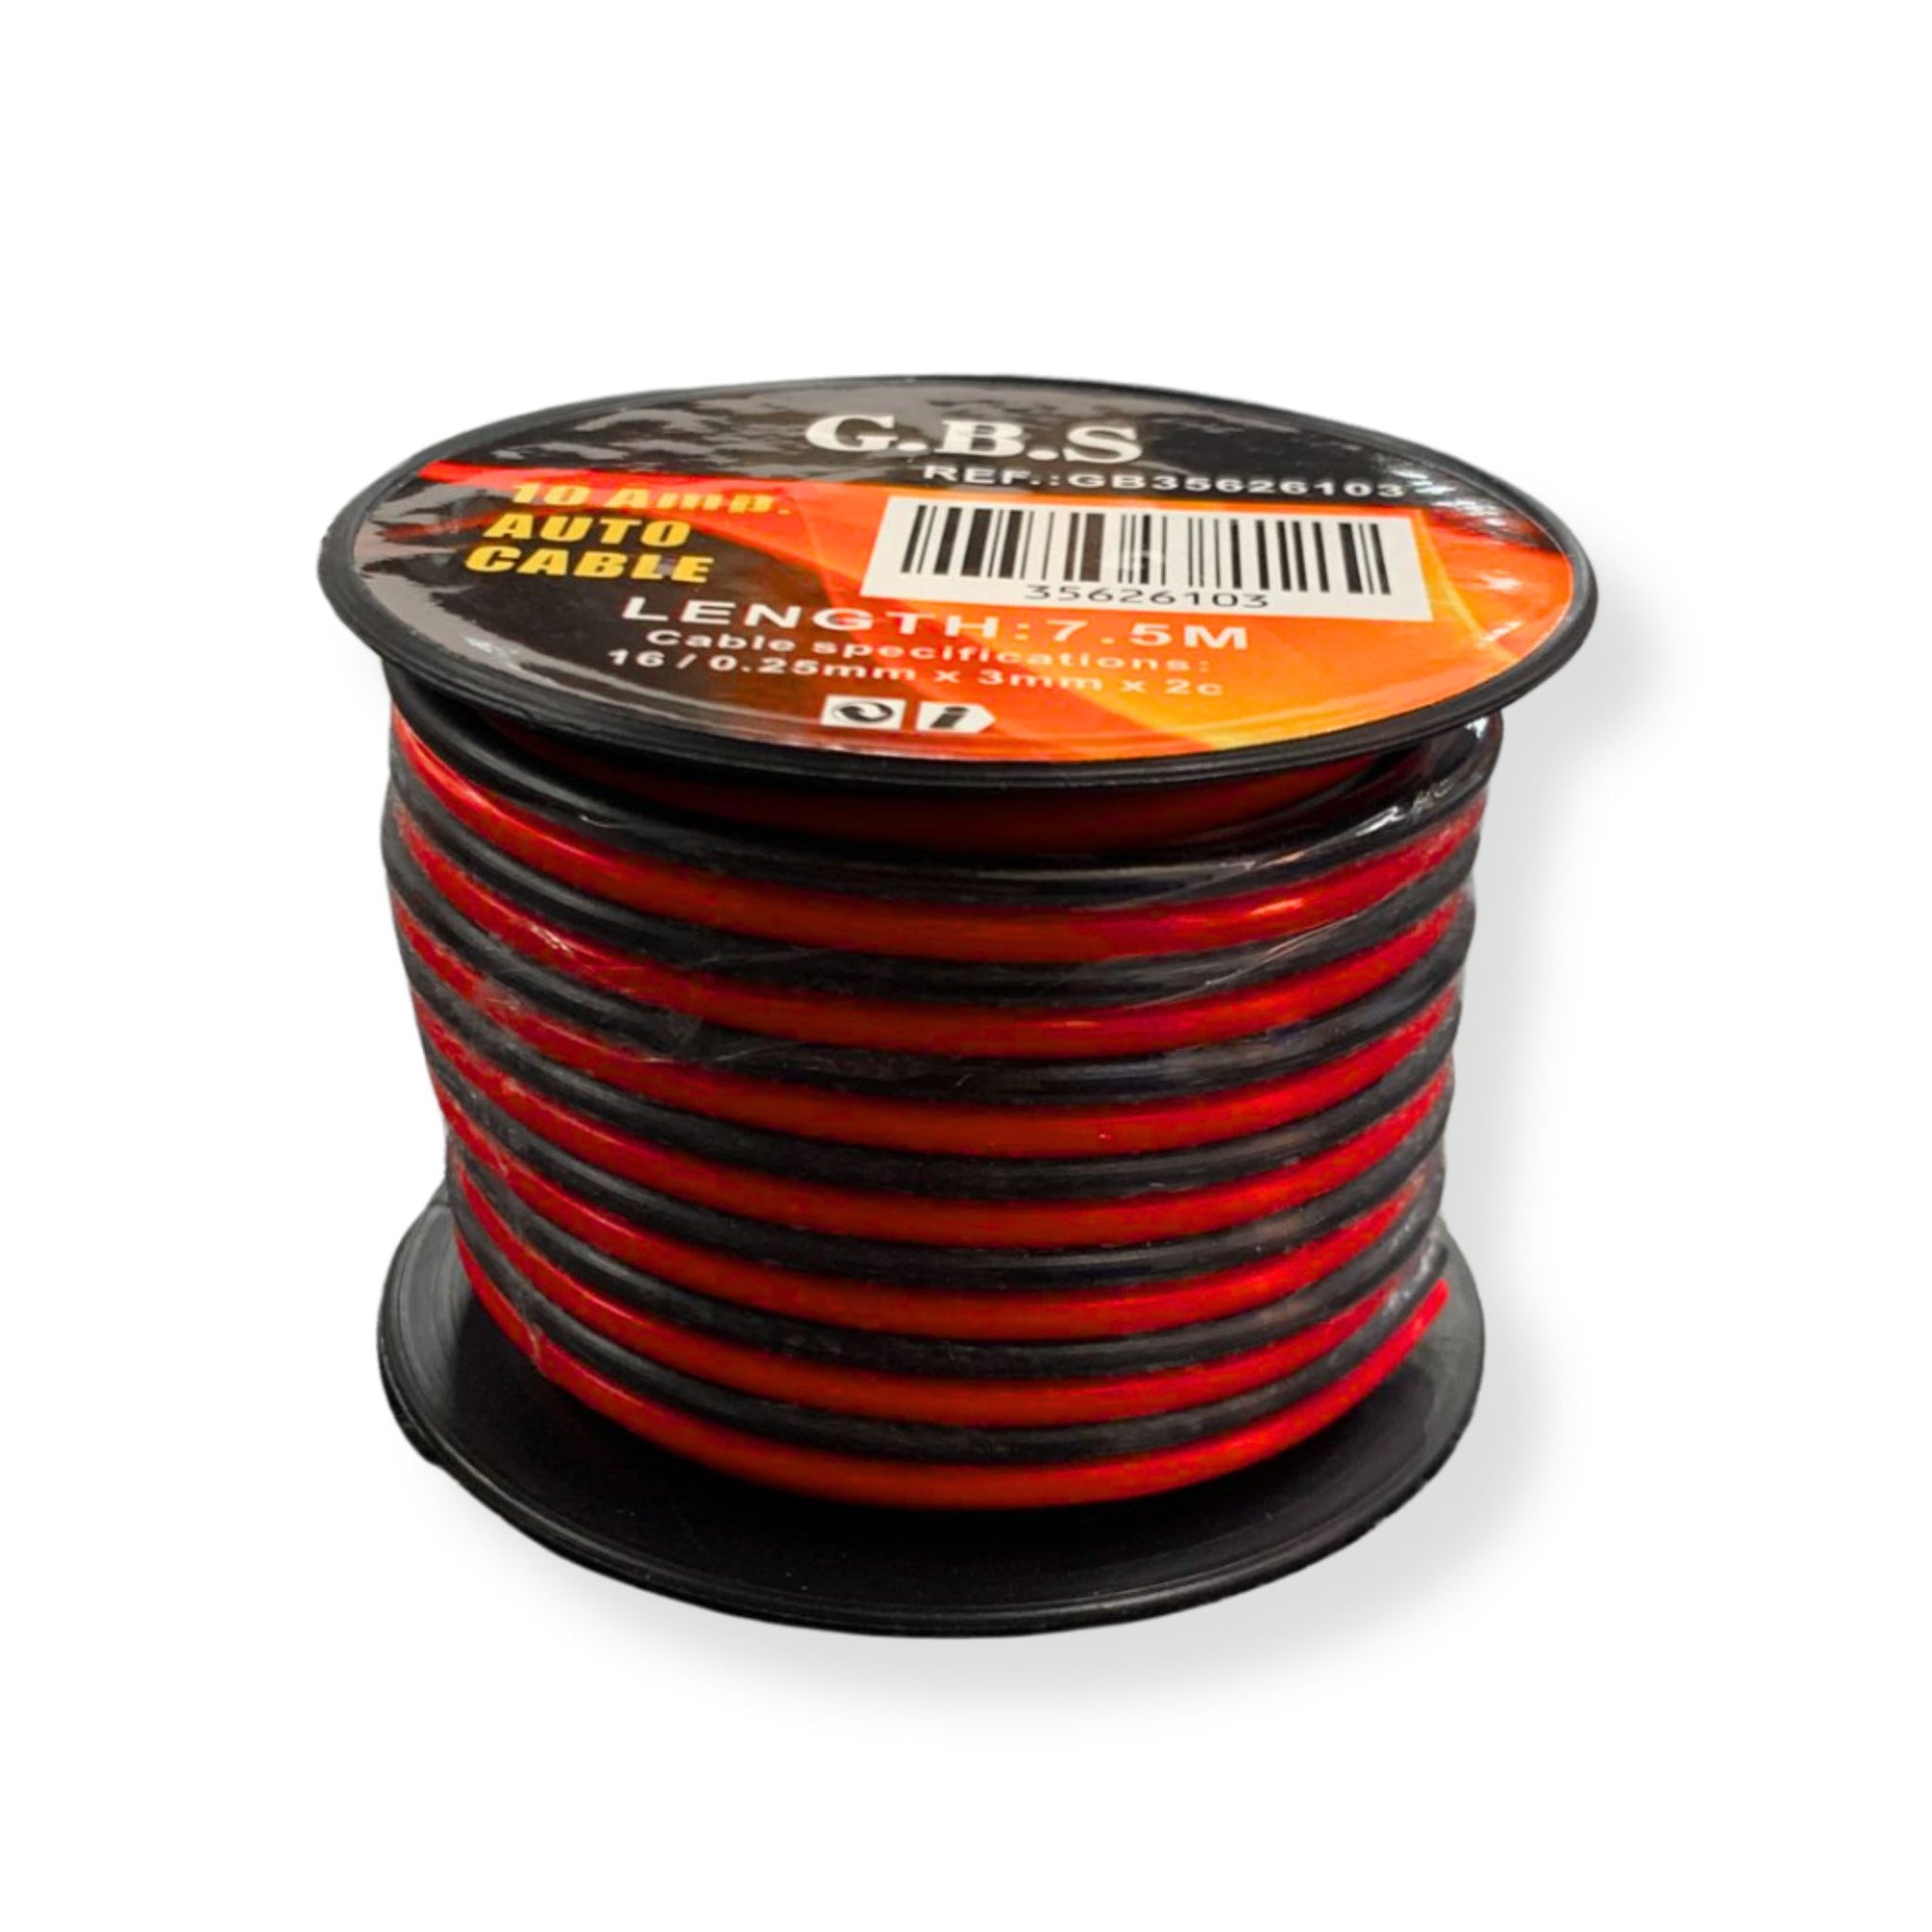 Twin Core Auto Cable, Red/Black, 10 Amp, 7.5 metres - South East Clearance Centre